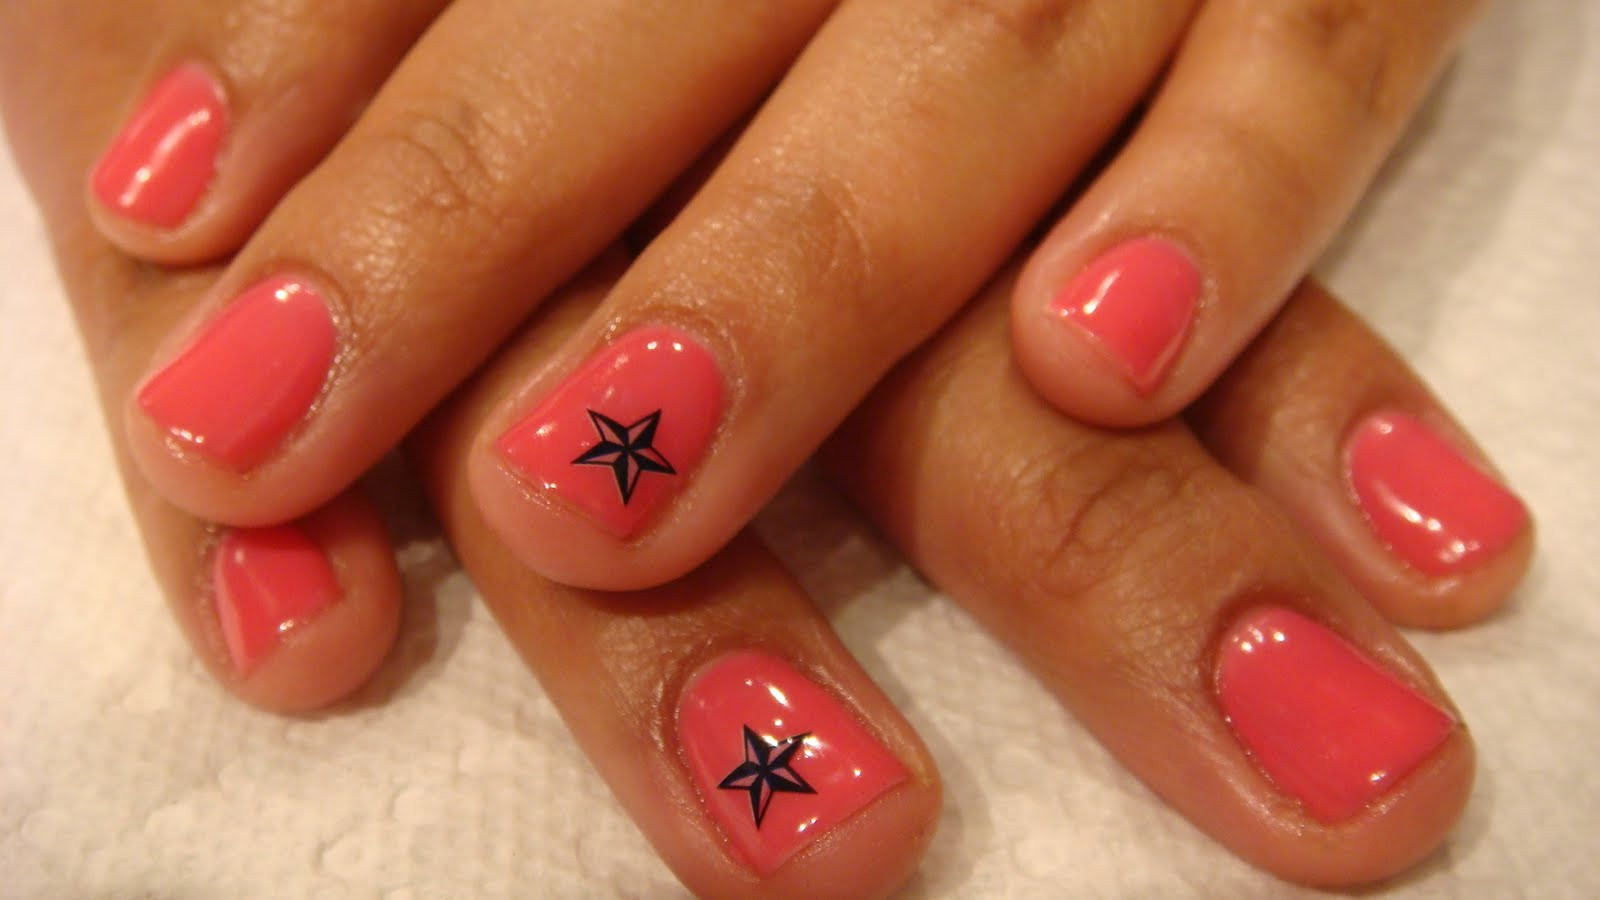 6. "November Nail Designs: Festive and Fun Ideas for the Holiday Season" - wide 4